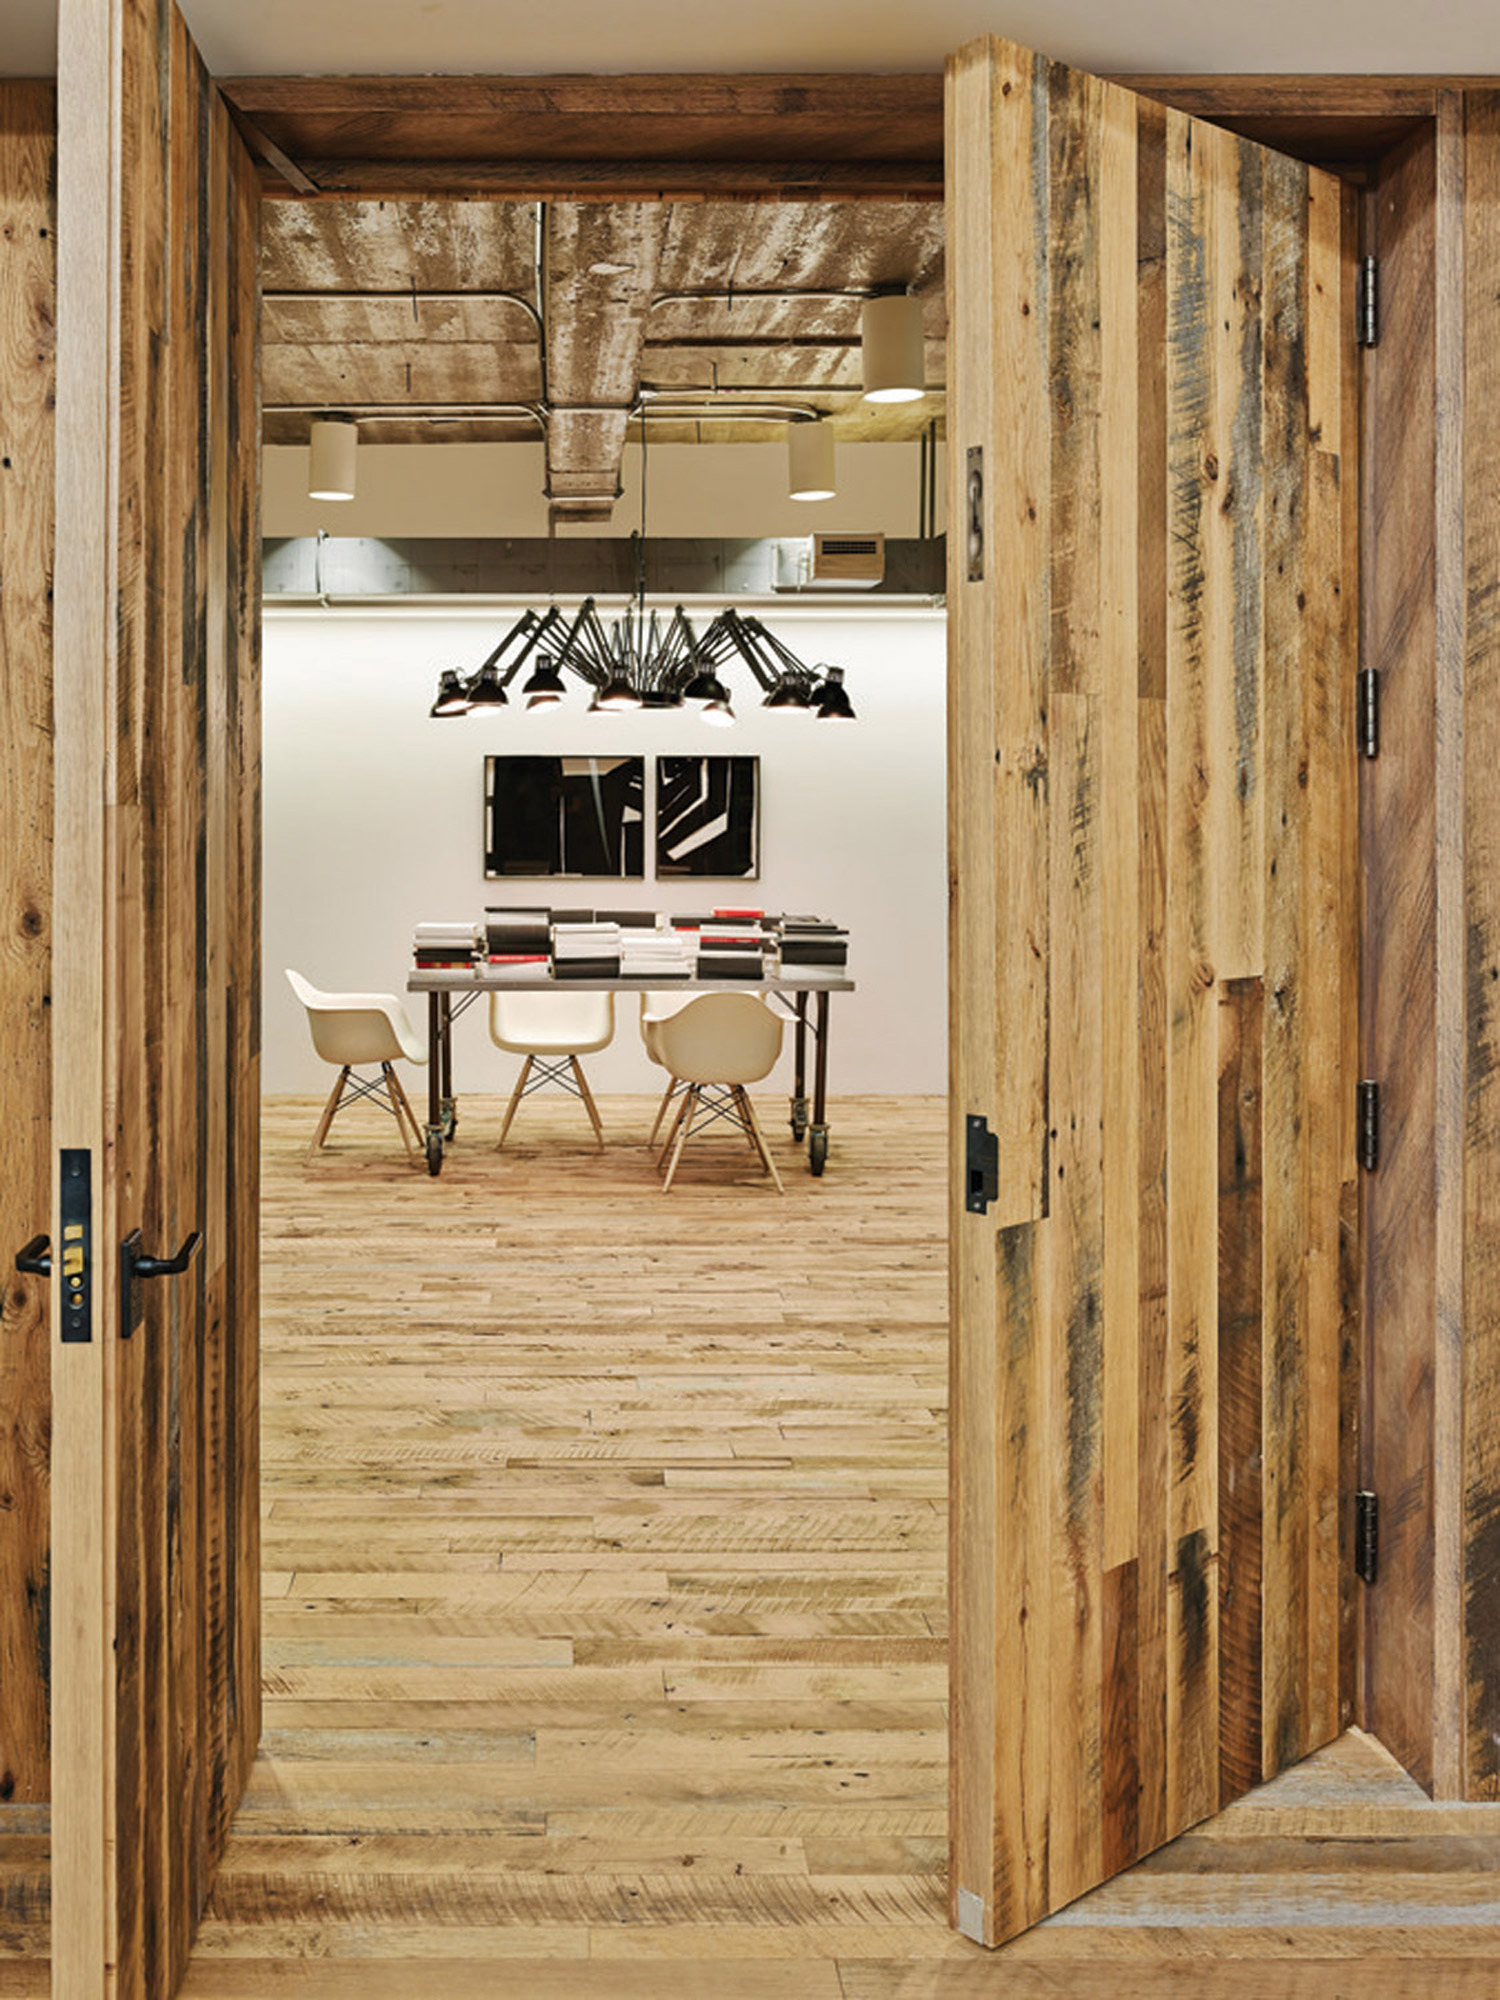 Rustic wooden doors open to a minimalist conference room with sleek chairs and a reflective white tabletop.